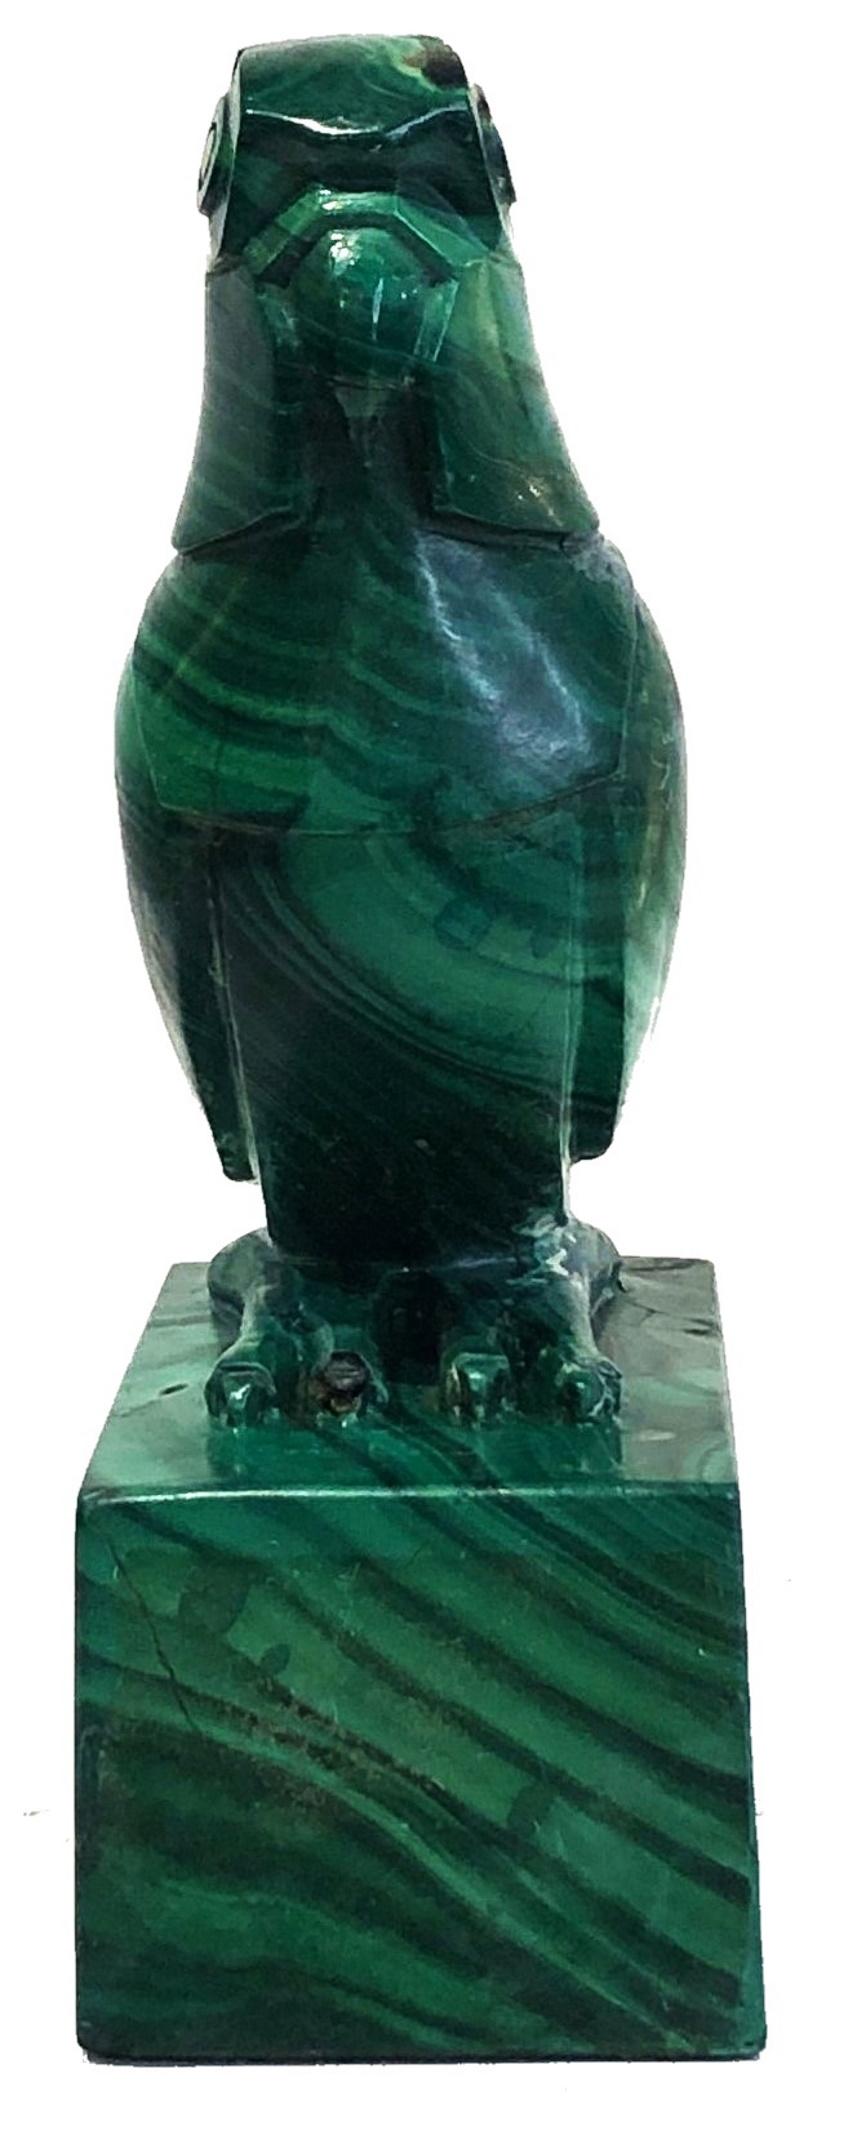 French Art Deco 
Édouard-Marcel Sandoz
PARROT
Cubist Sculpture in Carved Malachite 
Circa 1920
DIMENSIONS
Height: 5.75 inches            Width: 3-15/16 inches            Depth: 1-15/16 inches

DETAILS
Inscribed ‘E.M. Sandoz’ on base

CONDITION
There